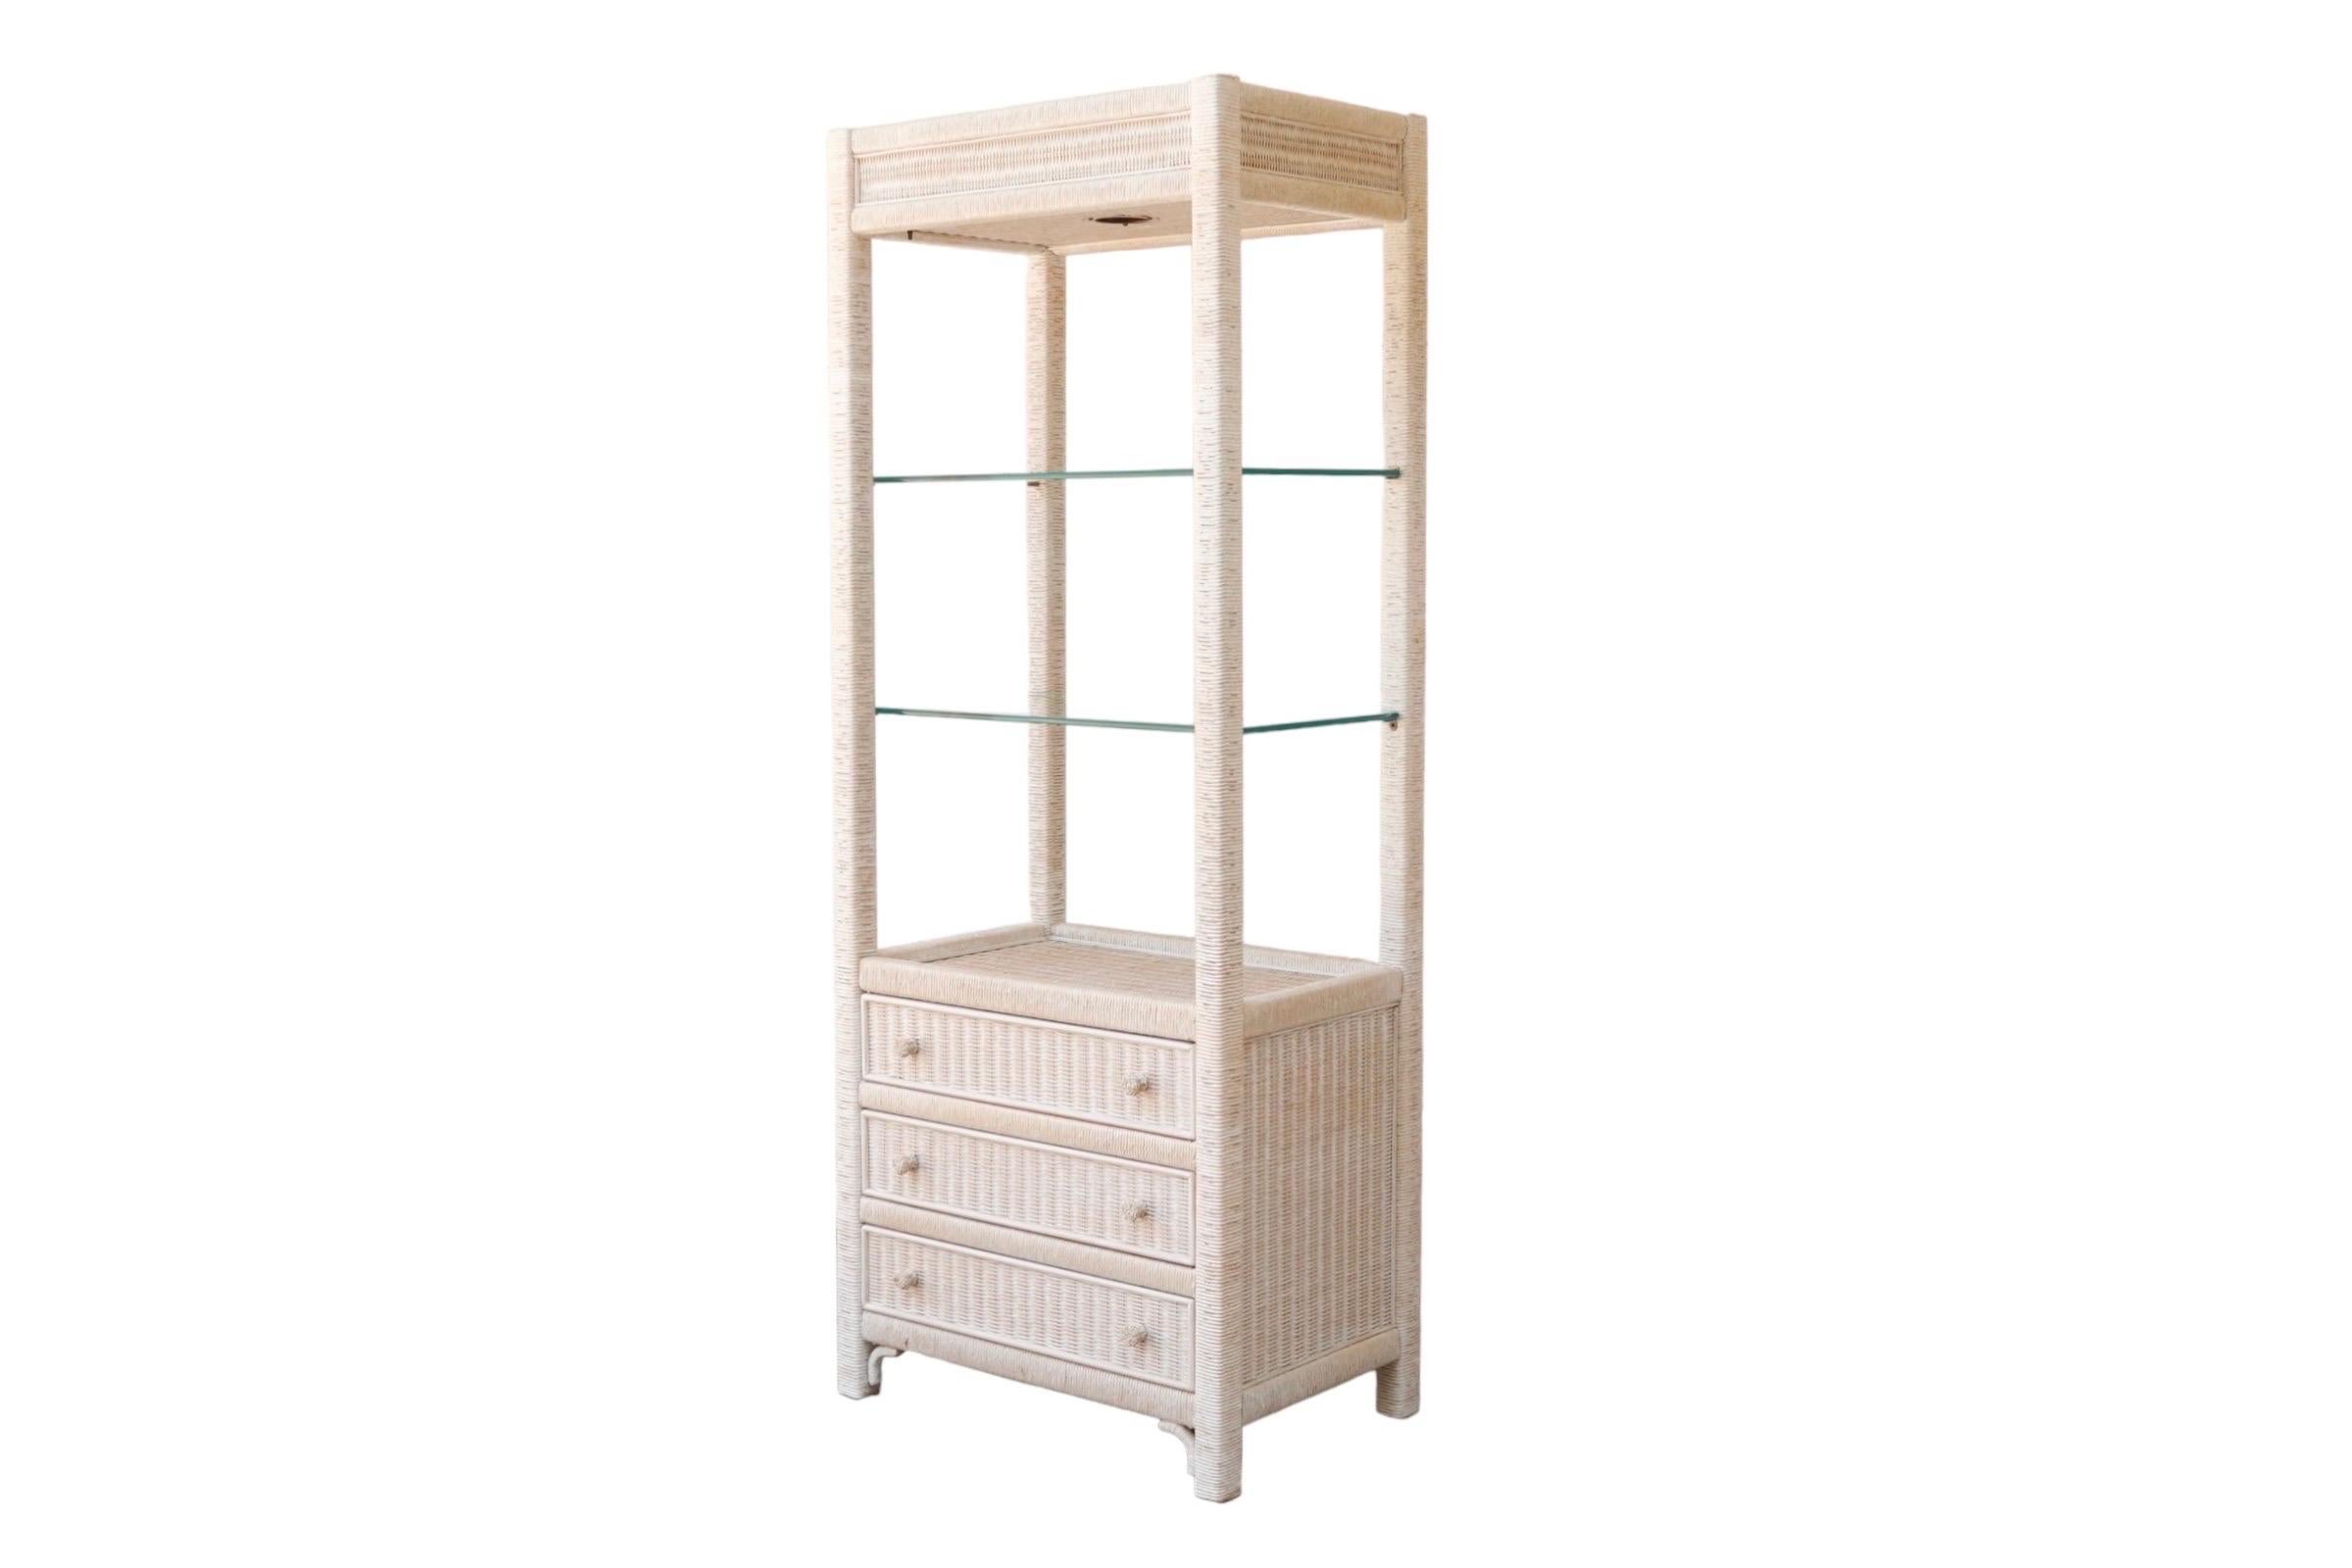 A rattan and glass cabinet designed by Henry Link for Lexington Furniture Co. Lit with a single light above two glass shelves, that rest in a white-washed rattan wrapped open frame. At the base are three drawers that open with woven rattan knob